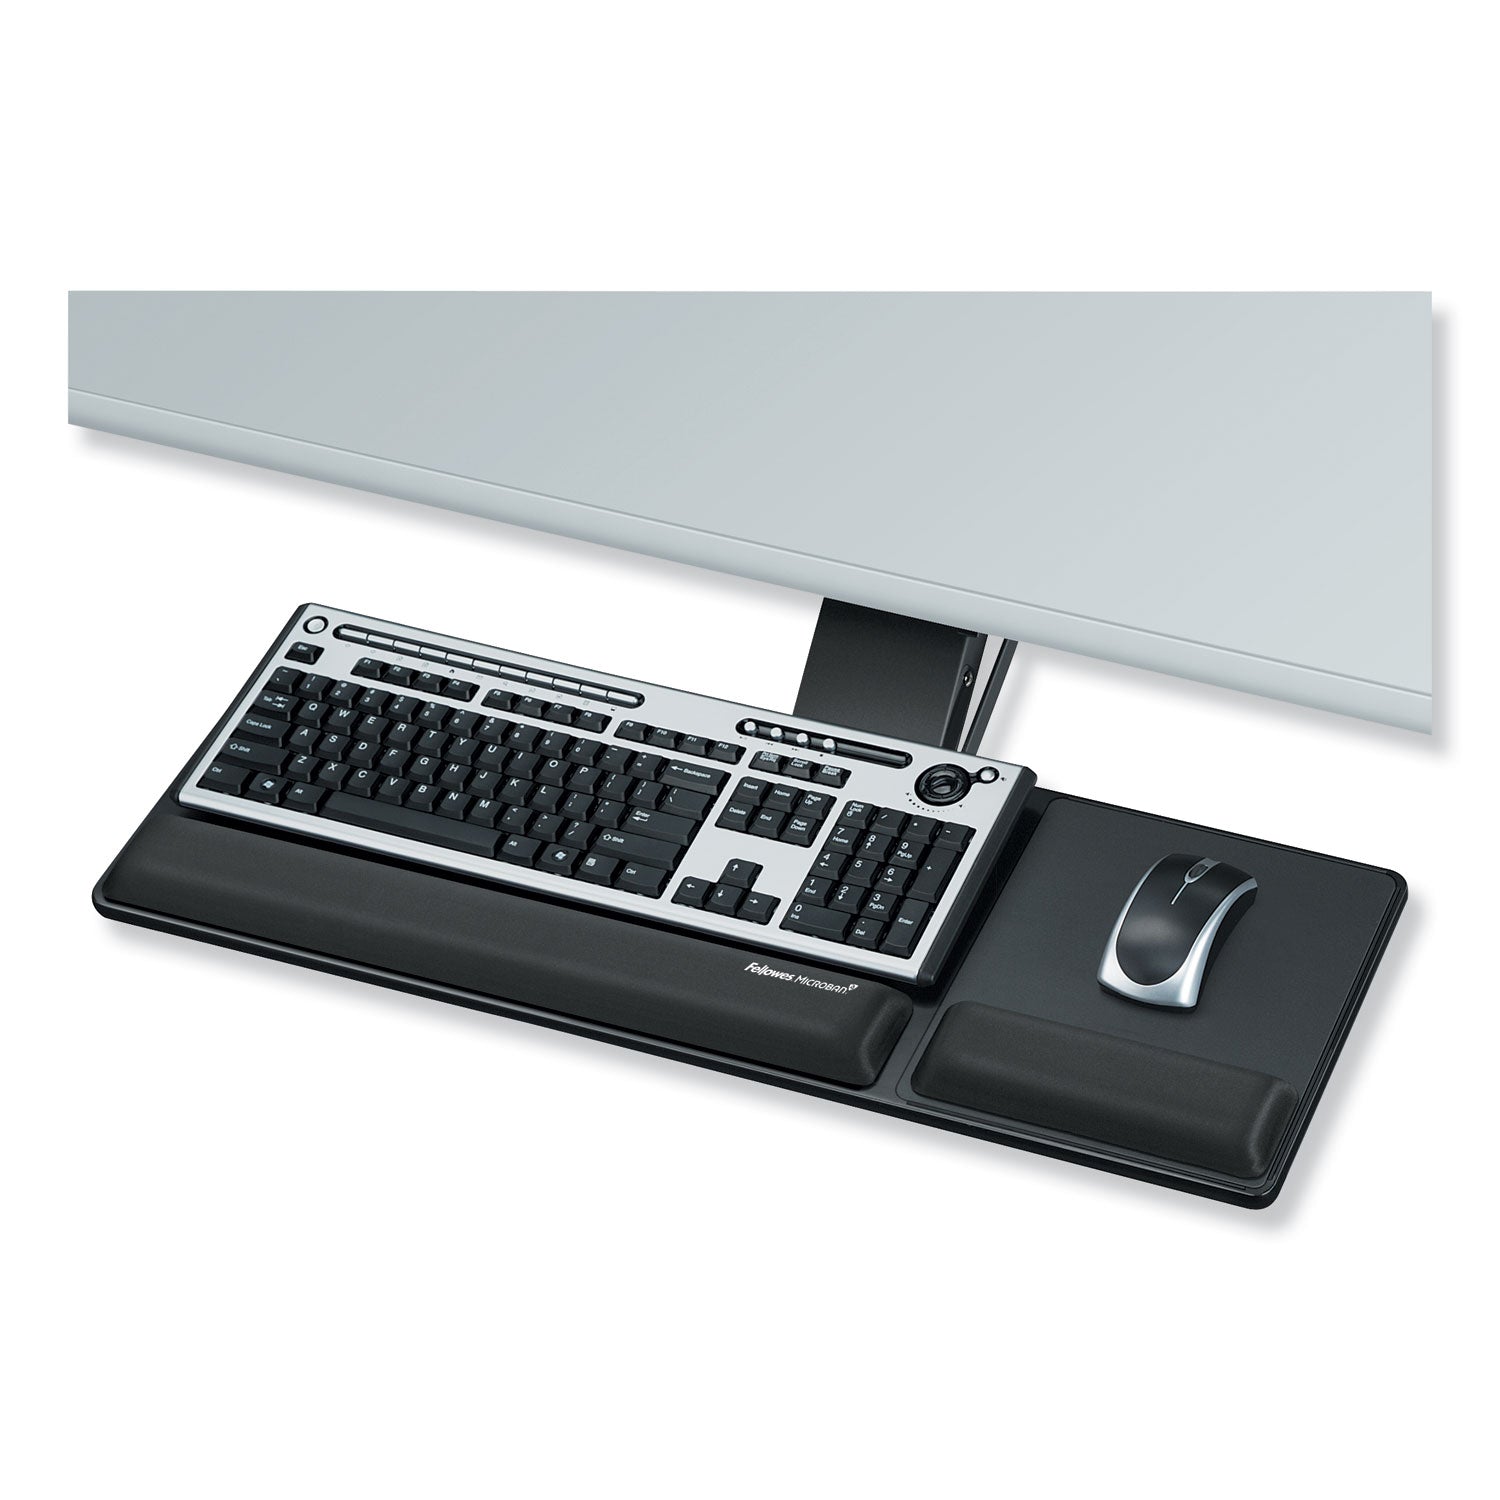 Designer Suites Compact Keyboard Tray, 19w x 9.5d, Black - 